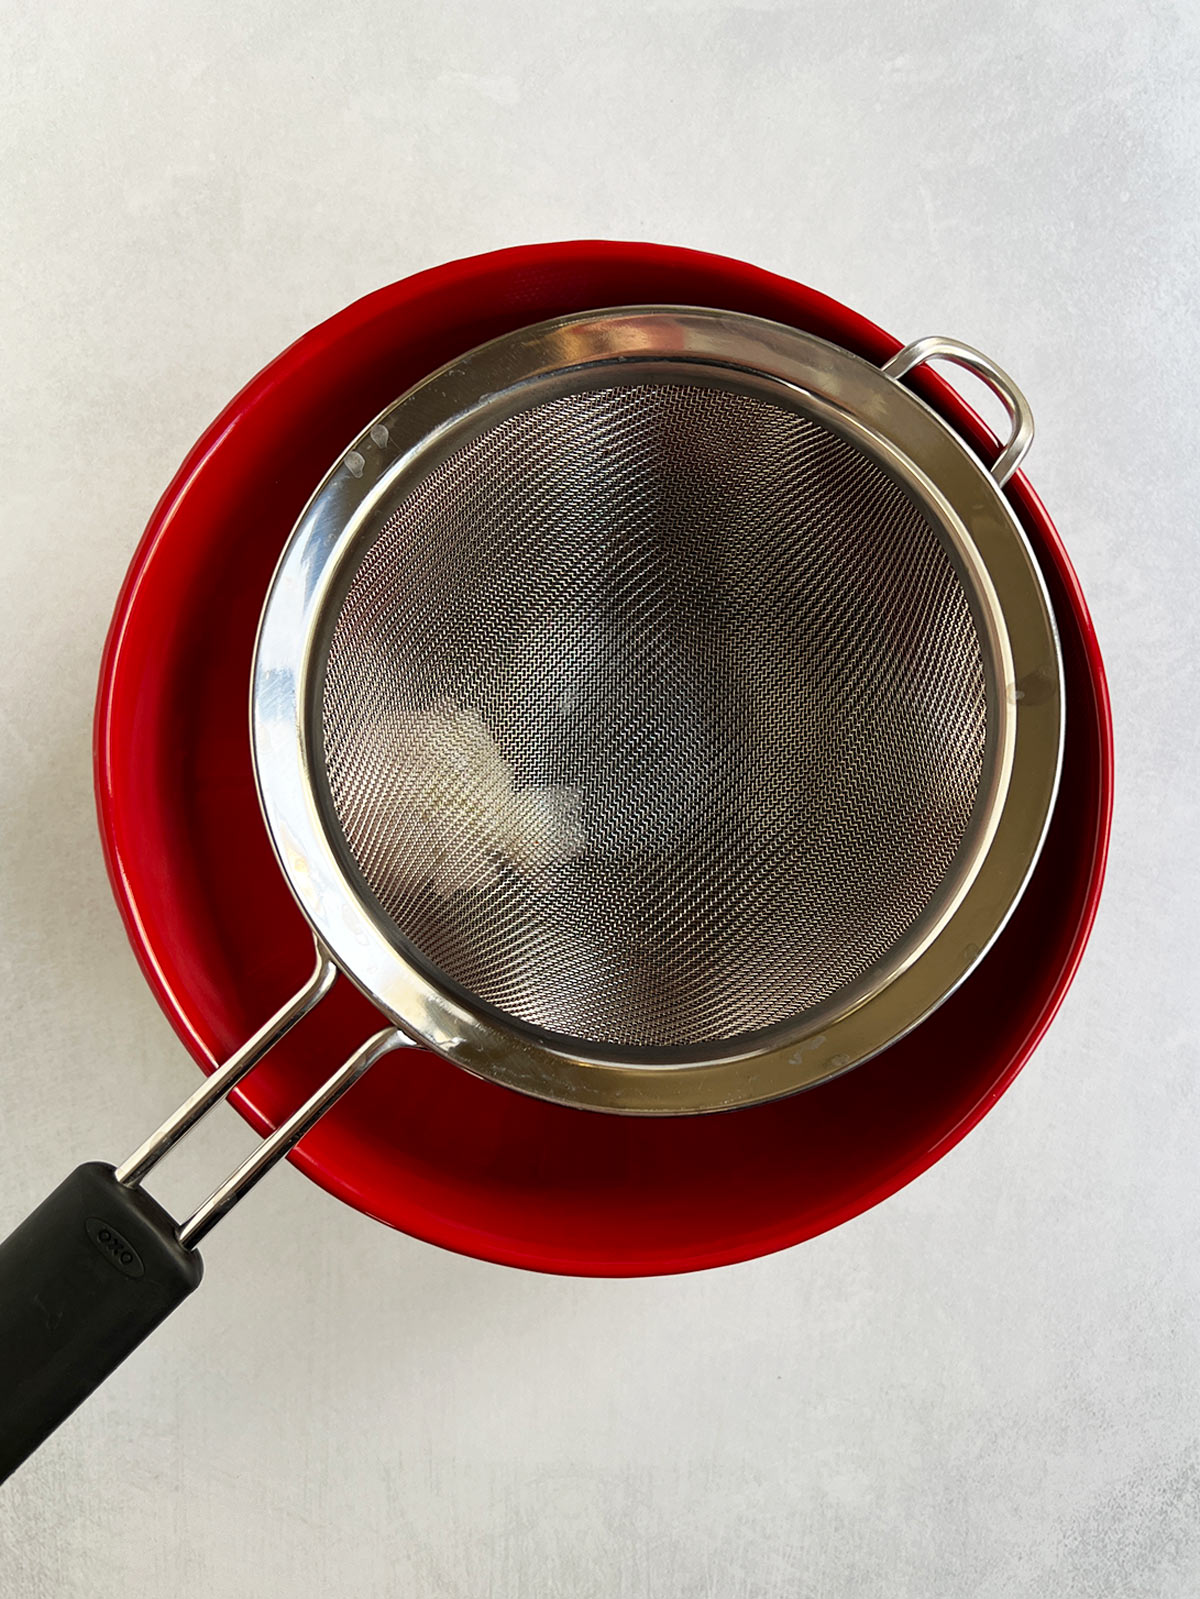 Strainer over a red bowl for chocolate truffle passover dessert.